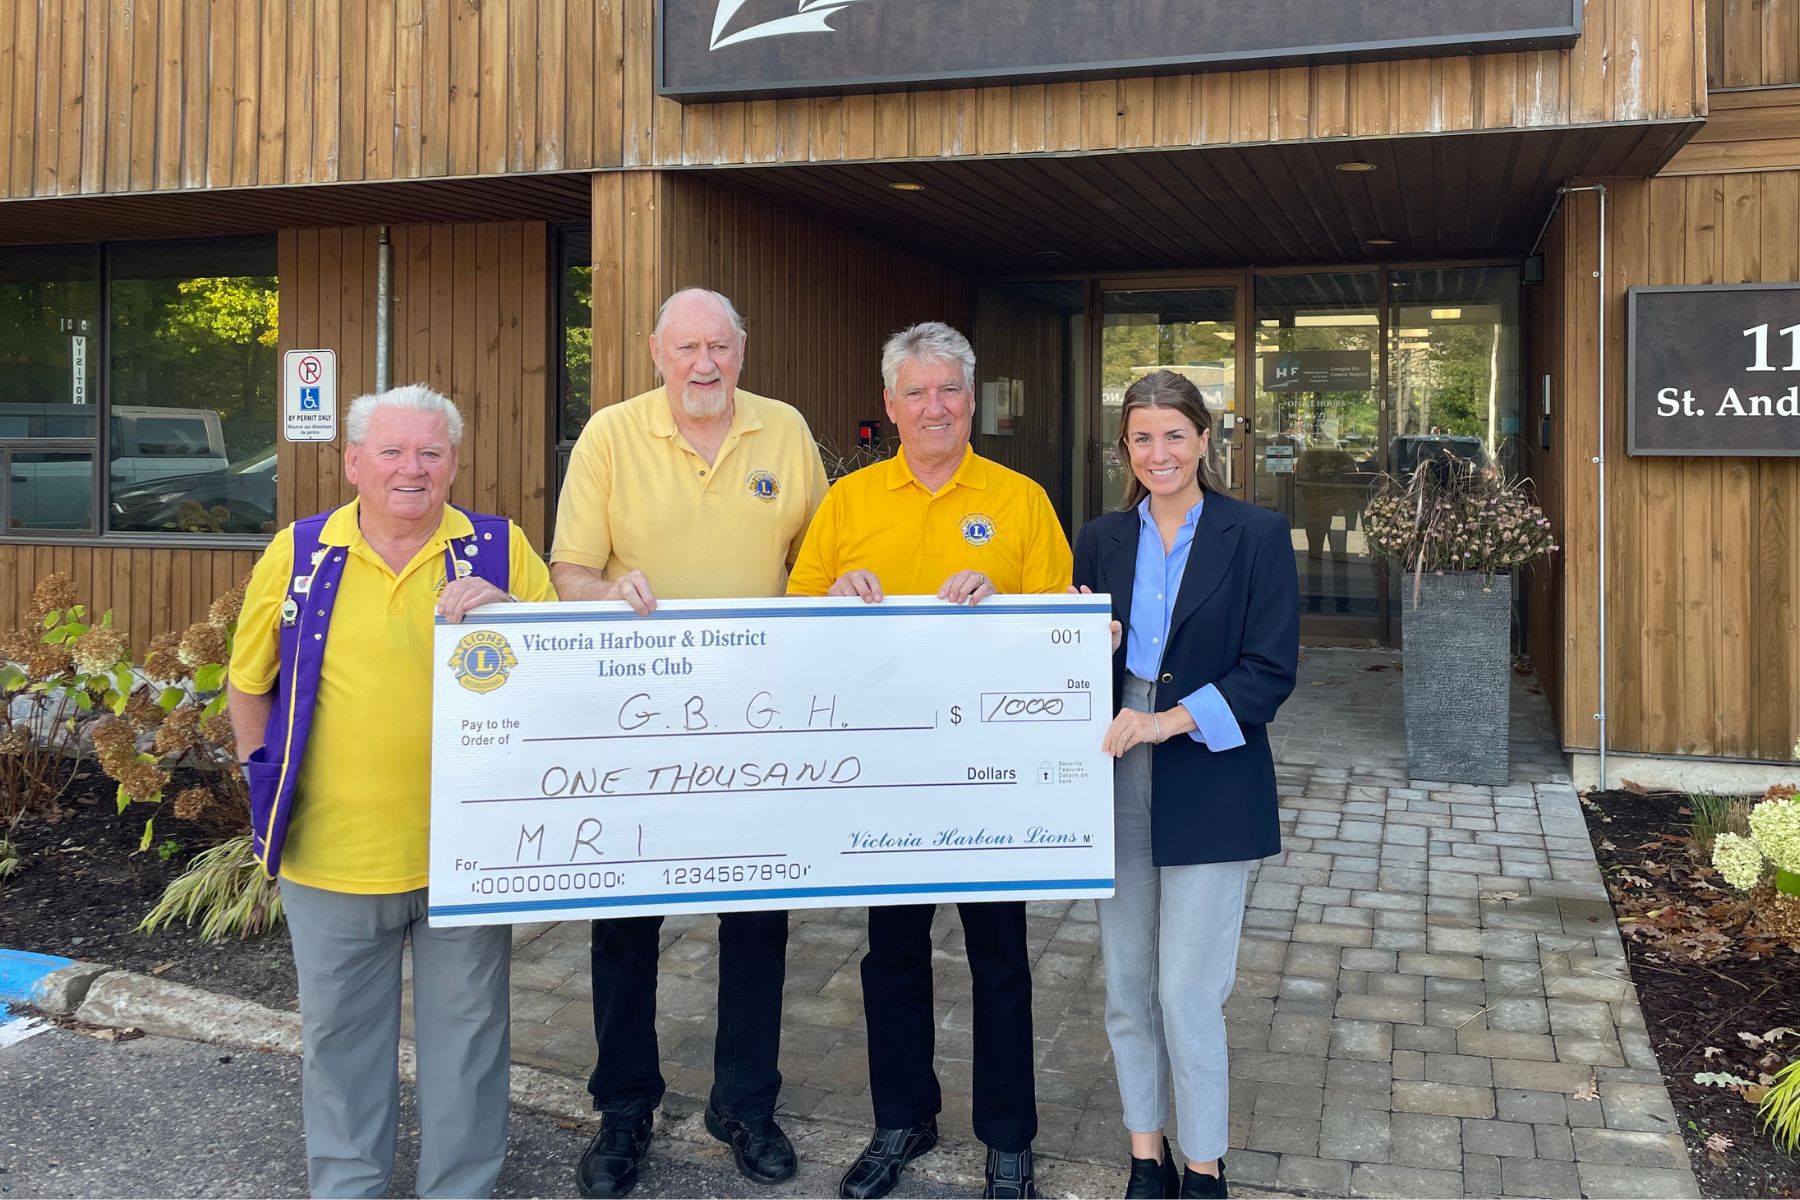 Three men in yellow Lions Club t-shirts and one woman hold a giant cheque made out to GBGH for $1, 000 from the Victoria Harbour Lions Club.